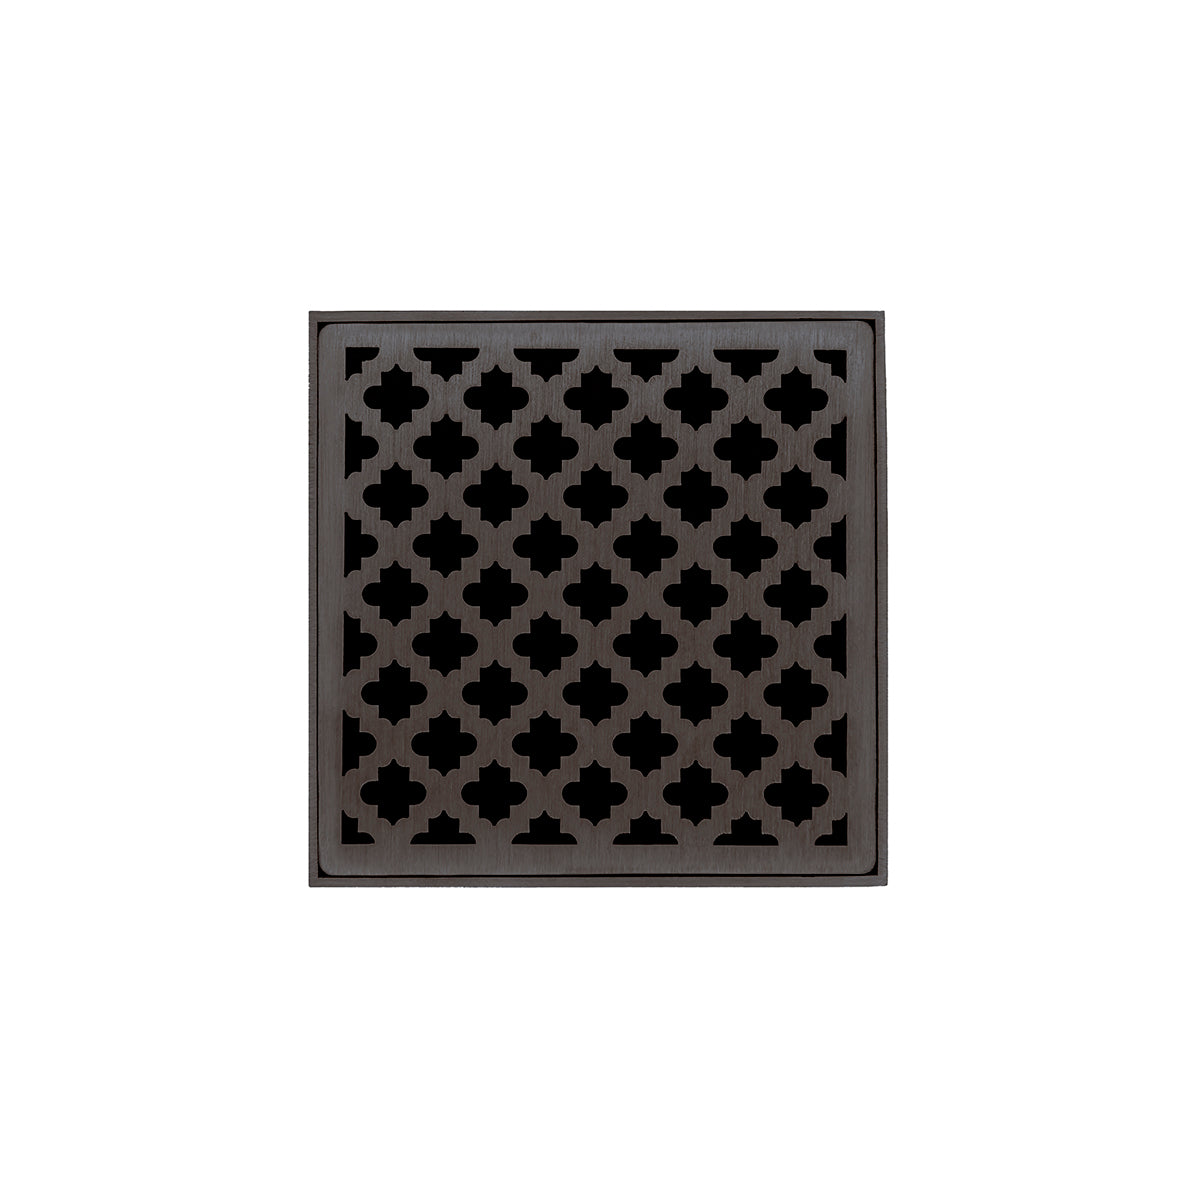 Infinity Drain 4" x 4" MDB 4 Premium Center Drain Kit with Moor Pattern Decorative Plate with Stainless Steel Bonded Flange Drain Body, 2" No Hub Outlet